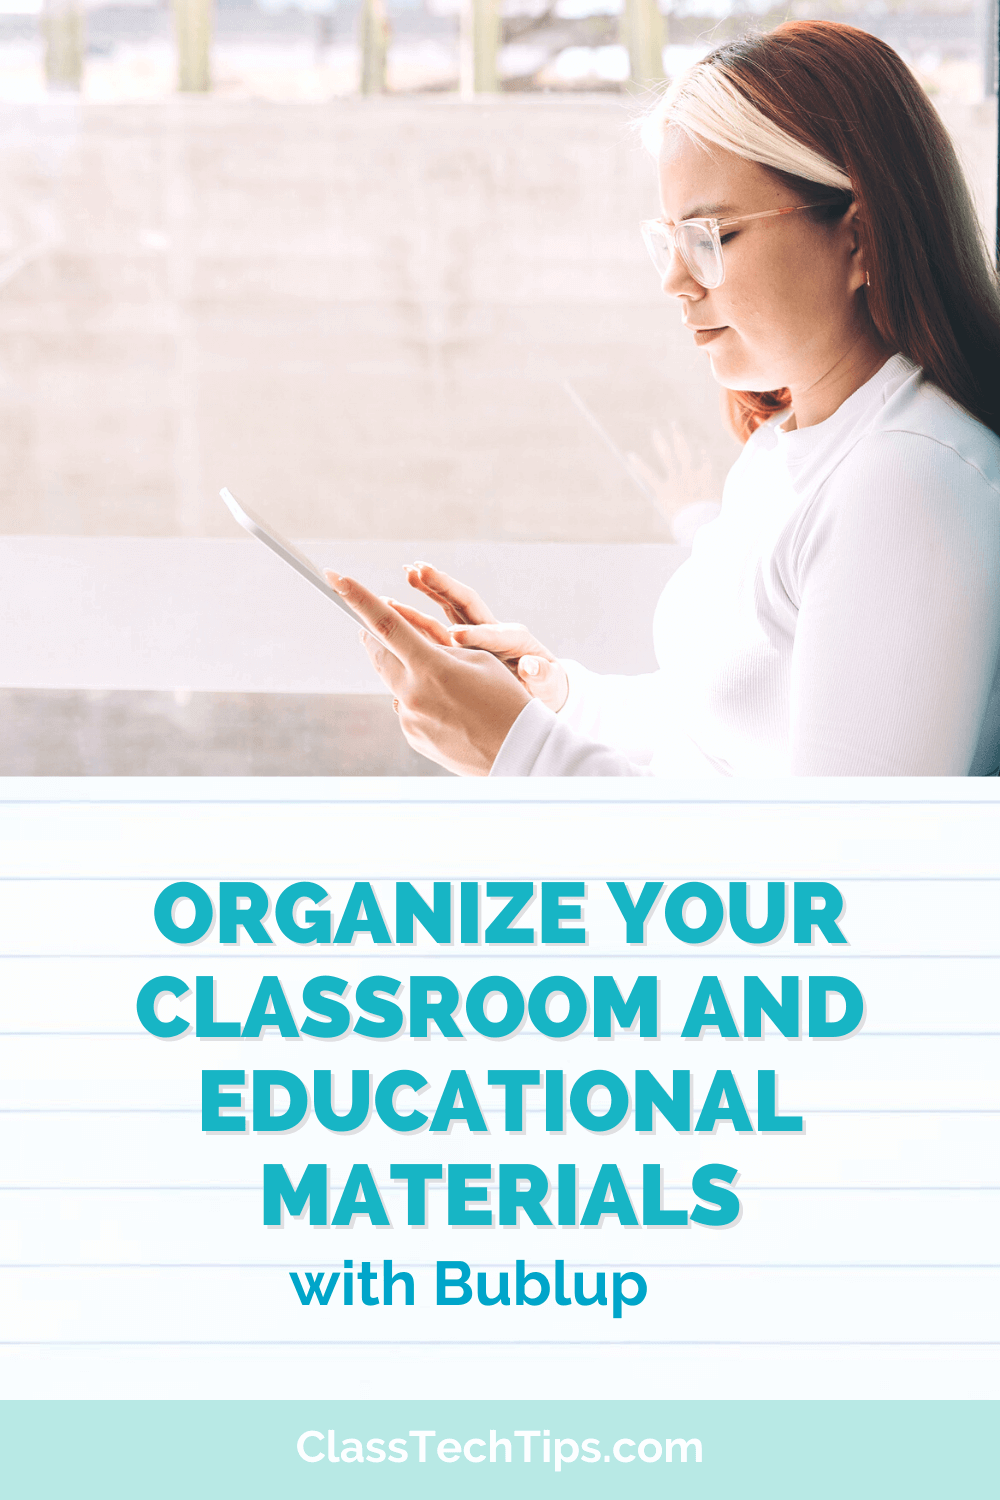 Featured image of a teacher holding a tablet, highlighting the topic of organizing educational materials and classroom spaces for teachers.